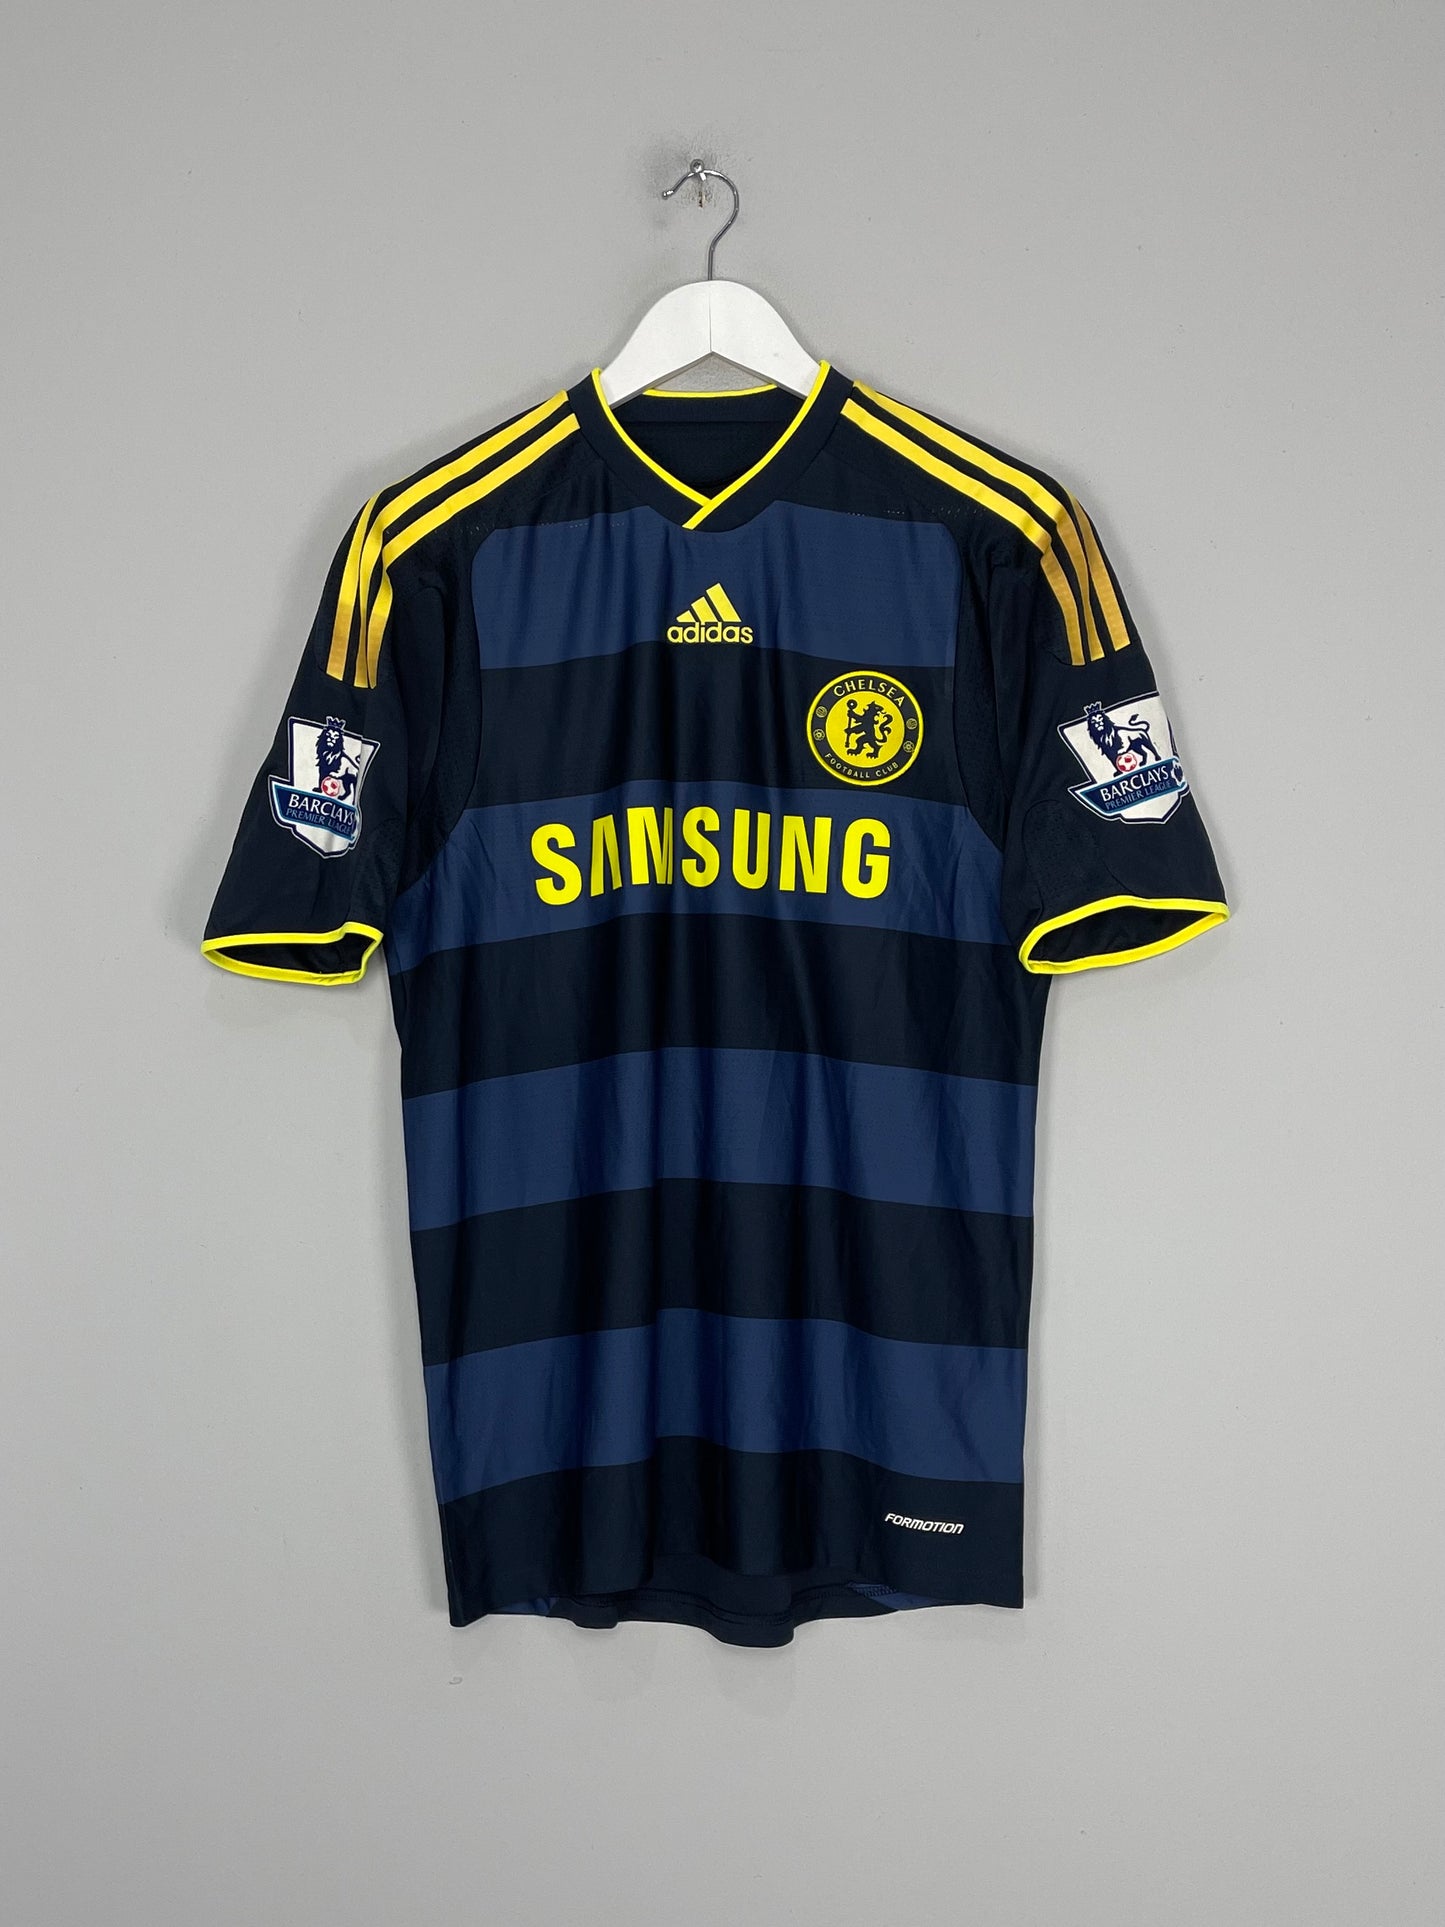 2009/10 CHELSEA LAMPARD #8 *MATCH ISSUE* AWAY SHIRT (M) ADIDAS